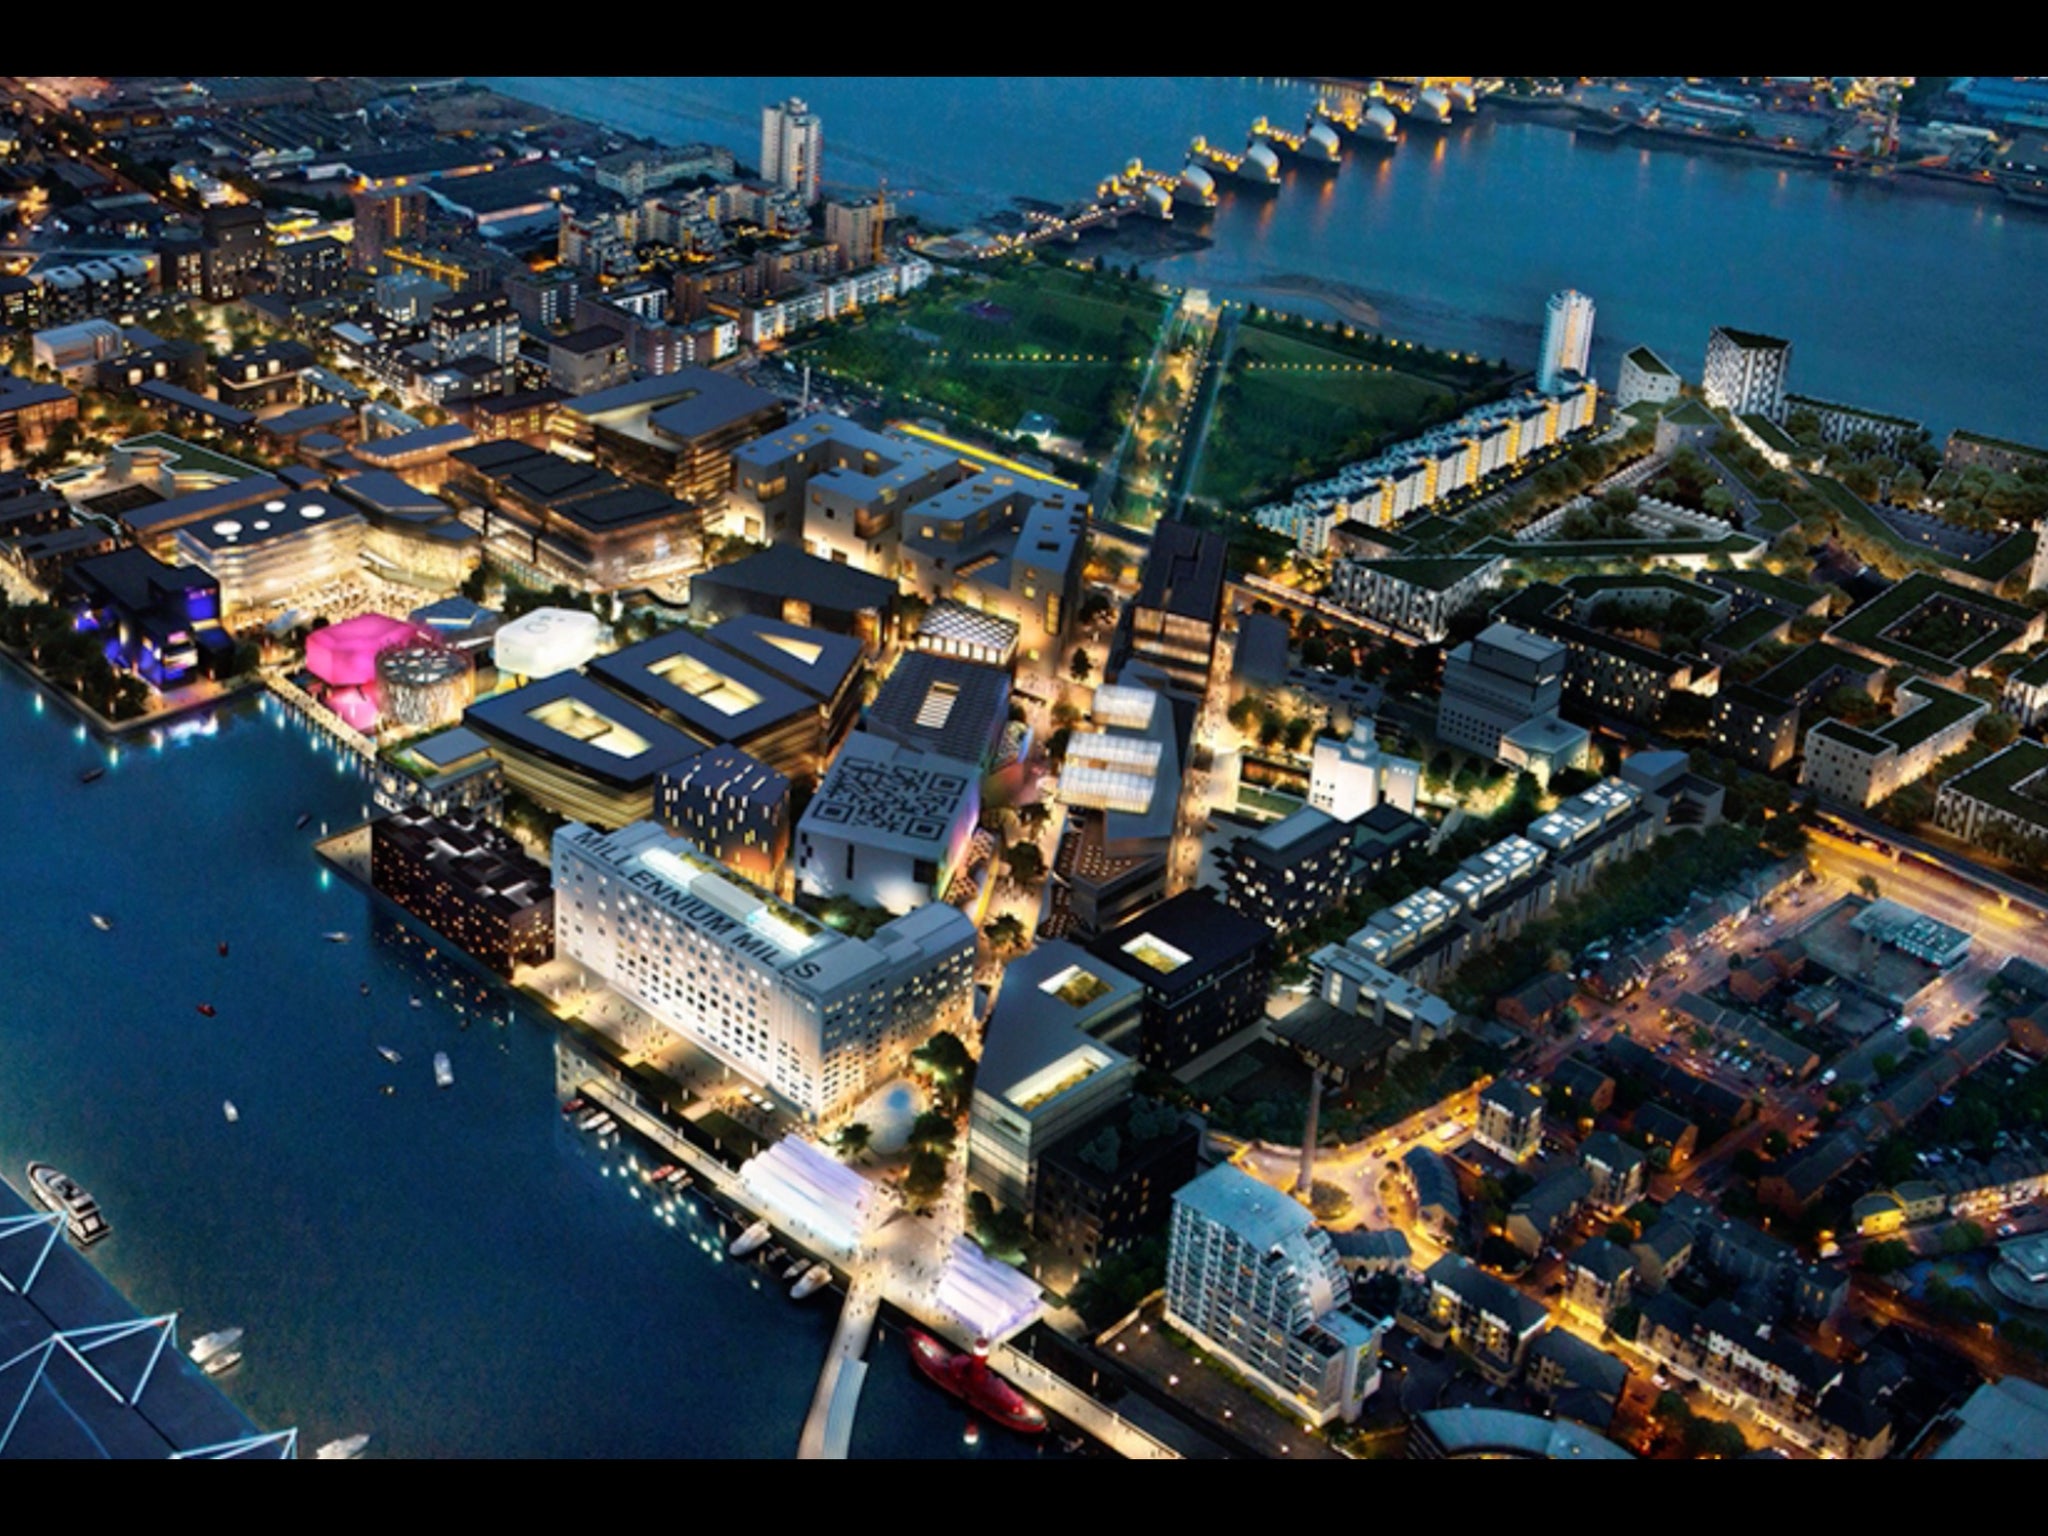 Could Silvertown look like this in ten years time?